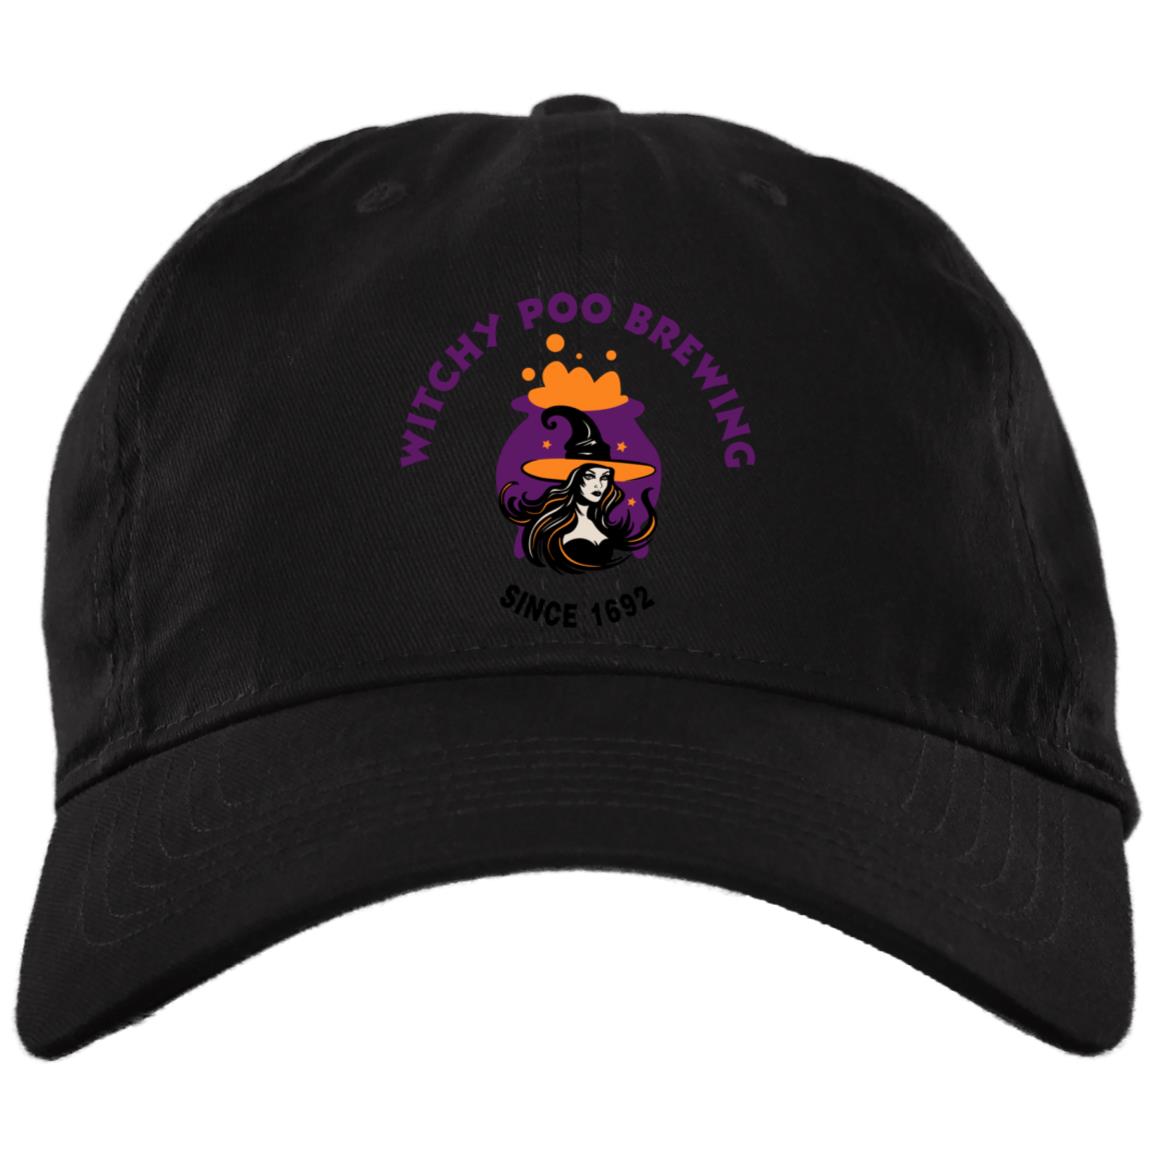 witchy POO Brewing T Shirt Witchy Poo Brewing Since 1692 Unstructured Dad Cap